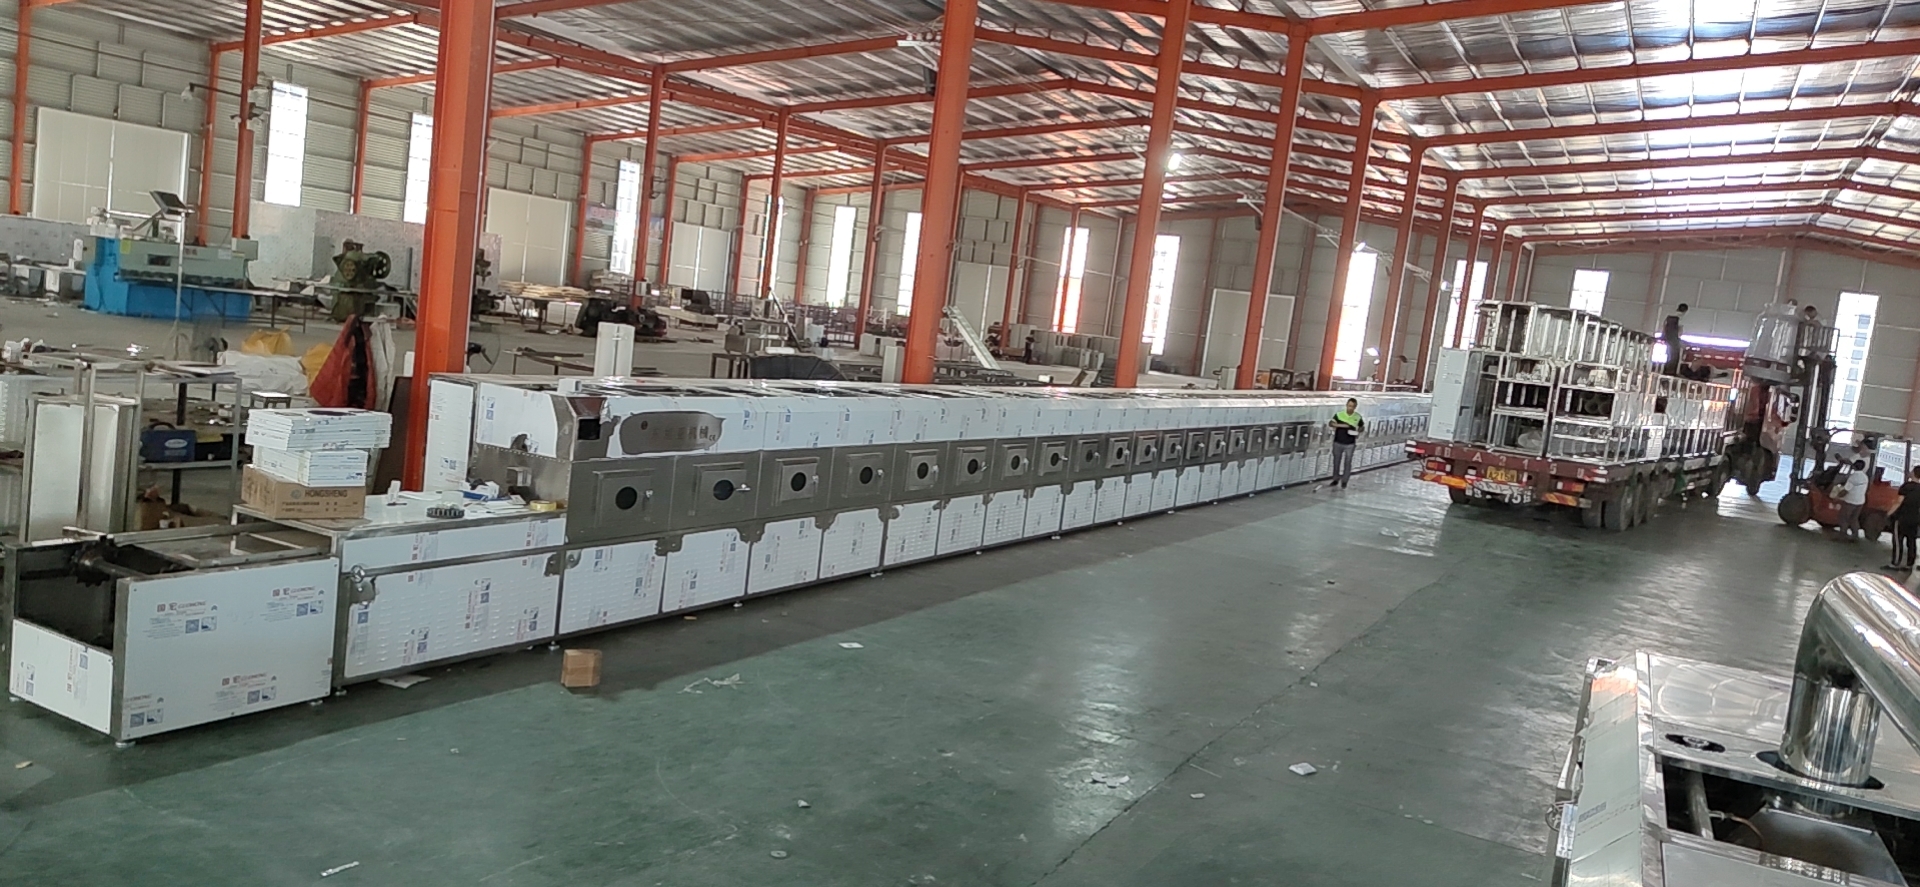 200KW water cooled tunnel type microwave drying machine loading for client in QINGDAO City China